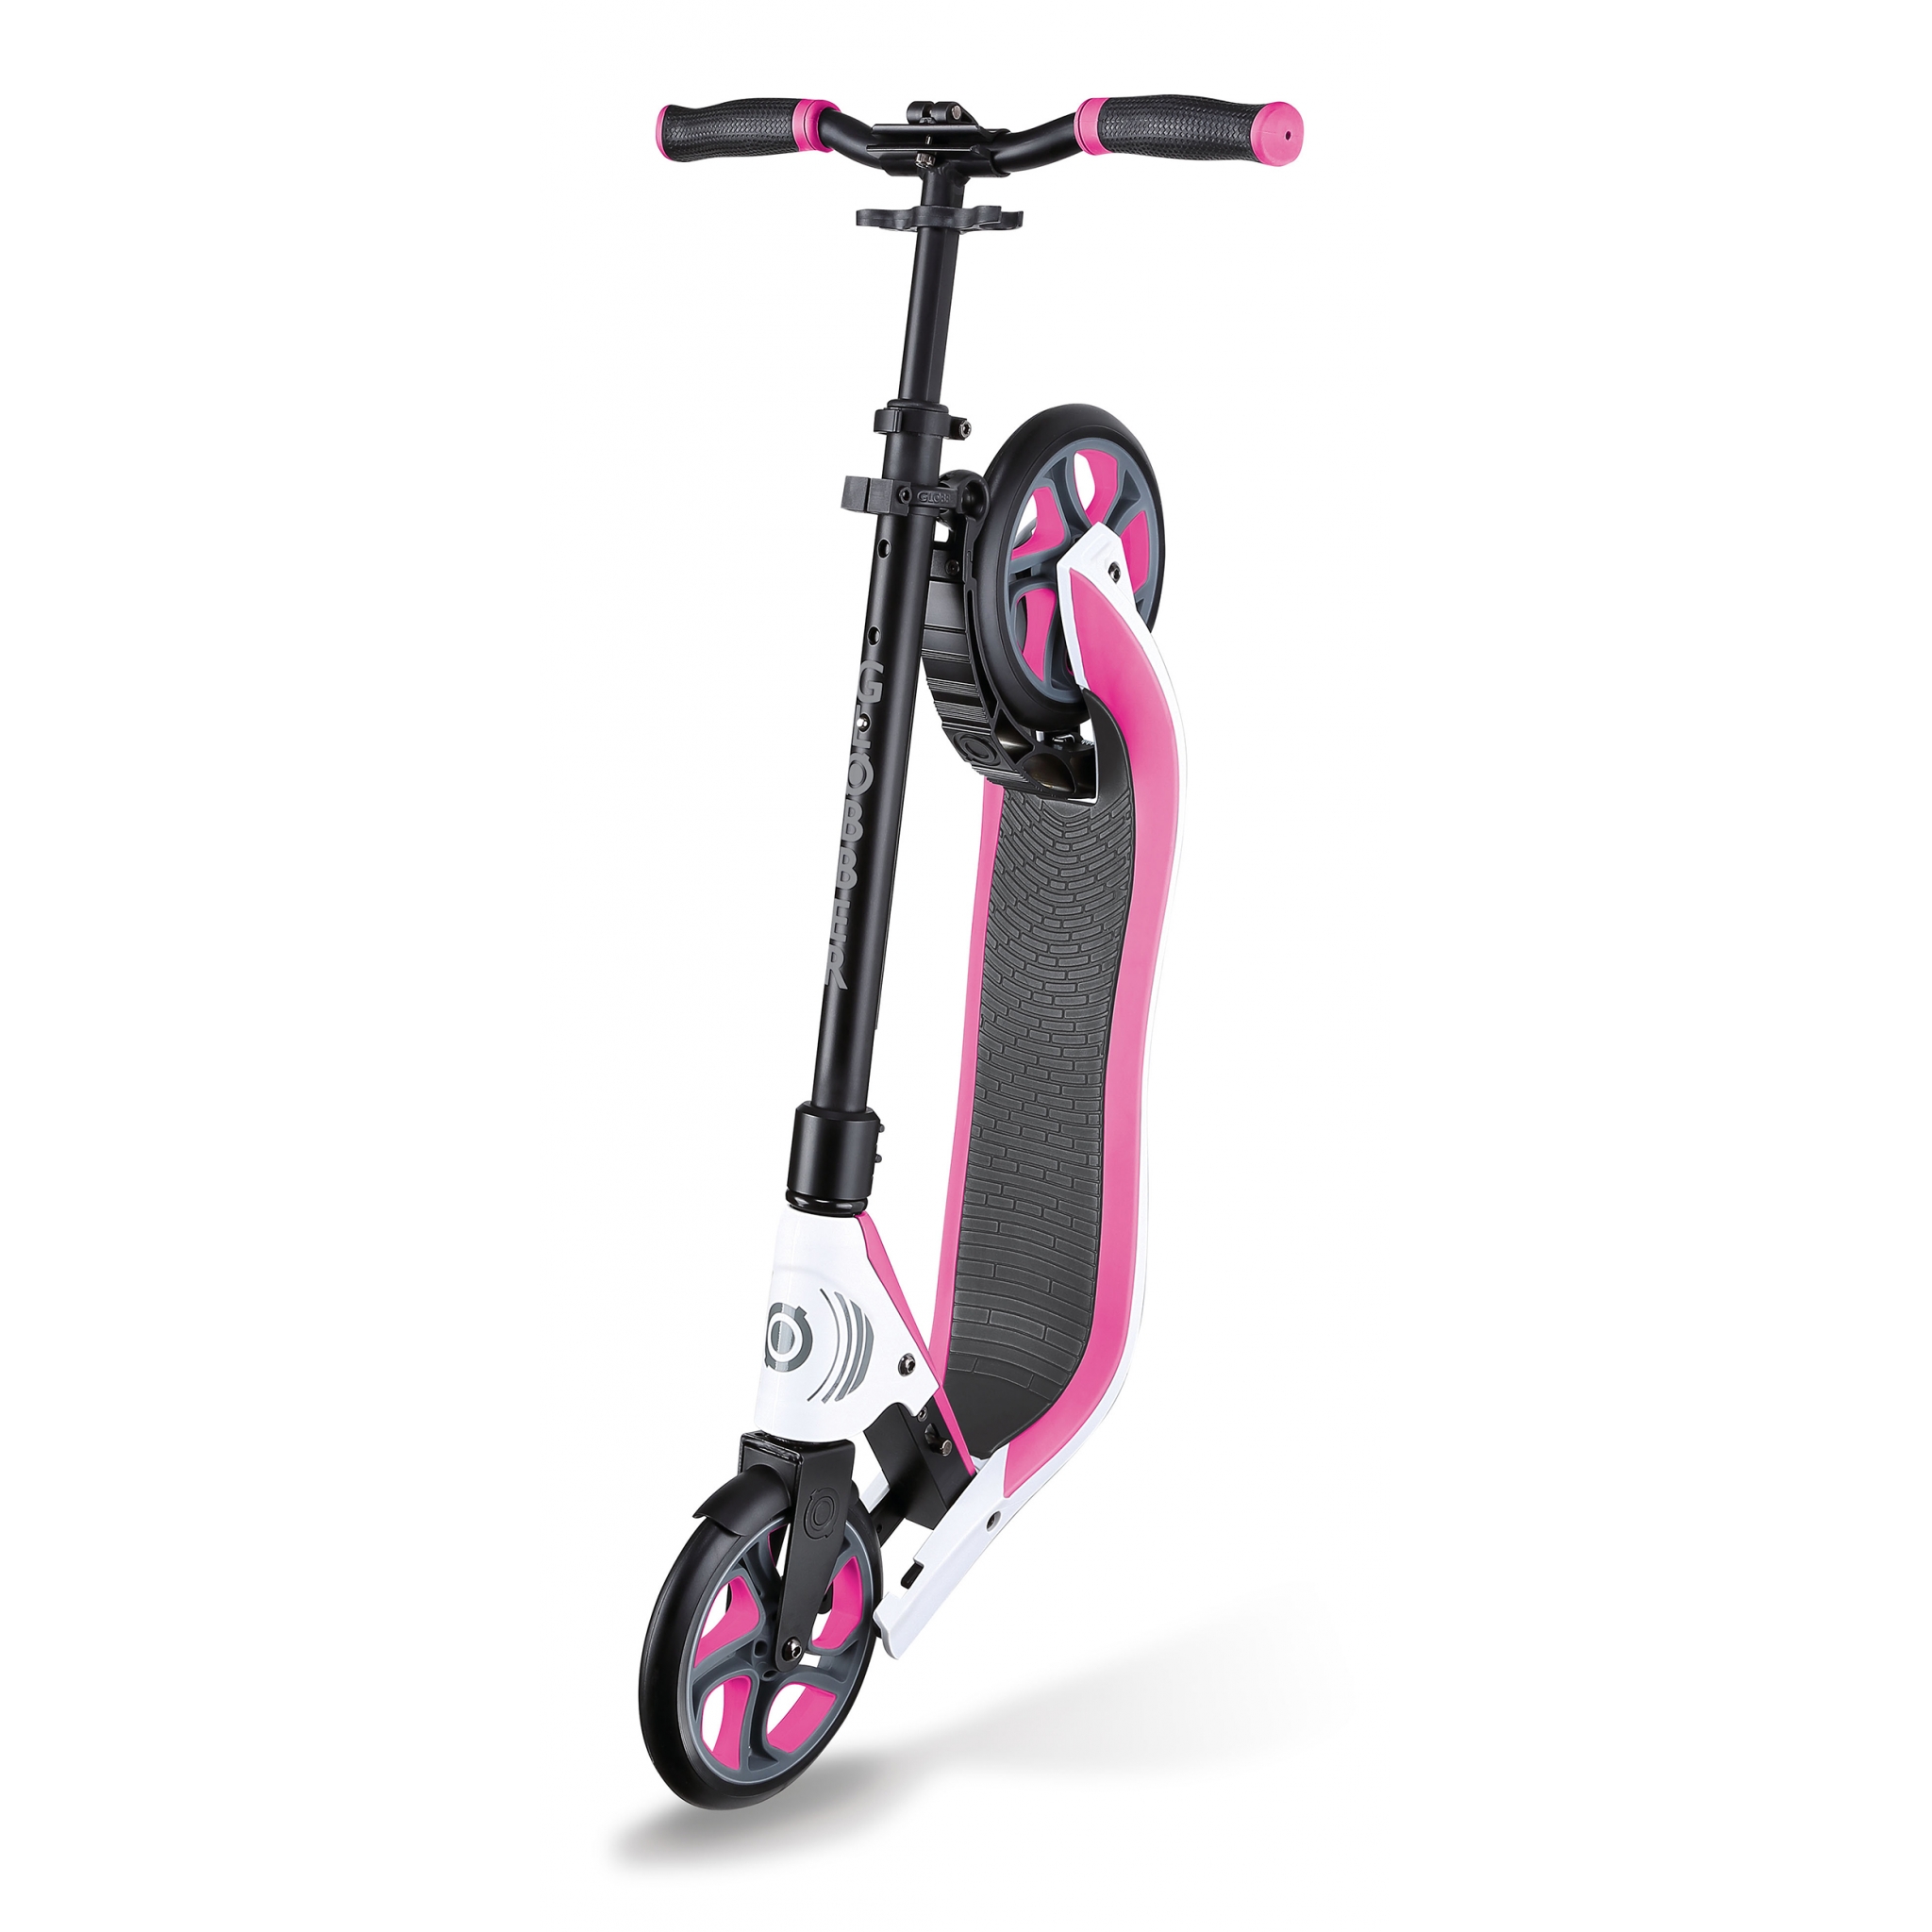 2-wheel foldable scooter for adults - Globber ONE NL 205 2